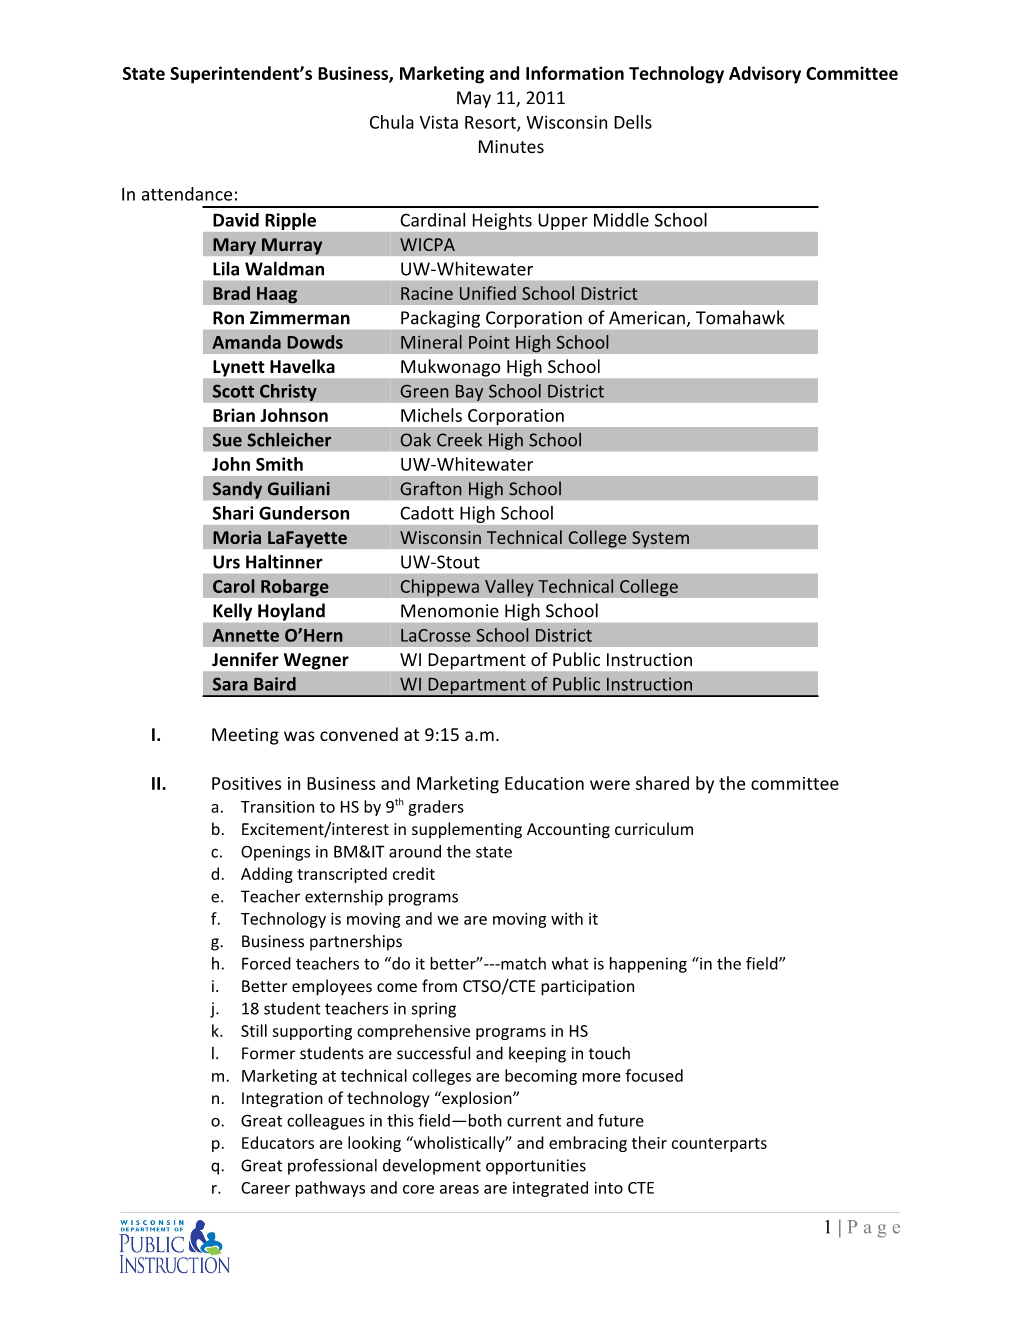 Business, Marketing, & Information Technology Advisory Committee Minutes - May 11, 2011